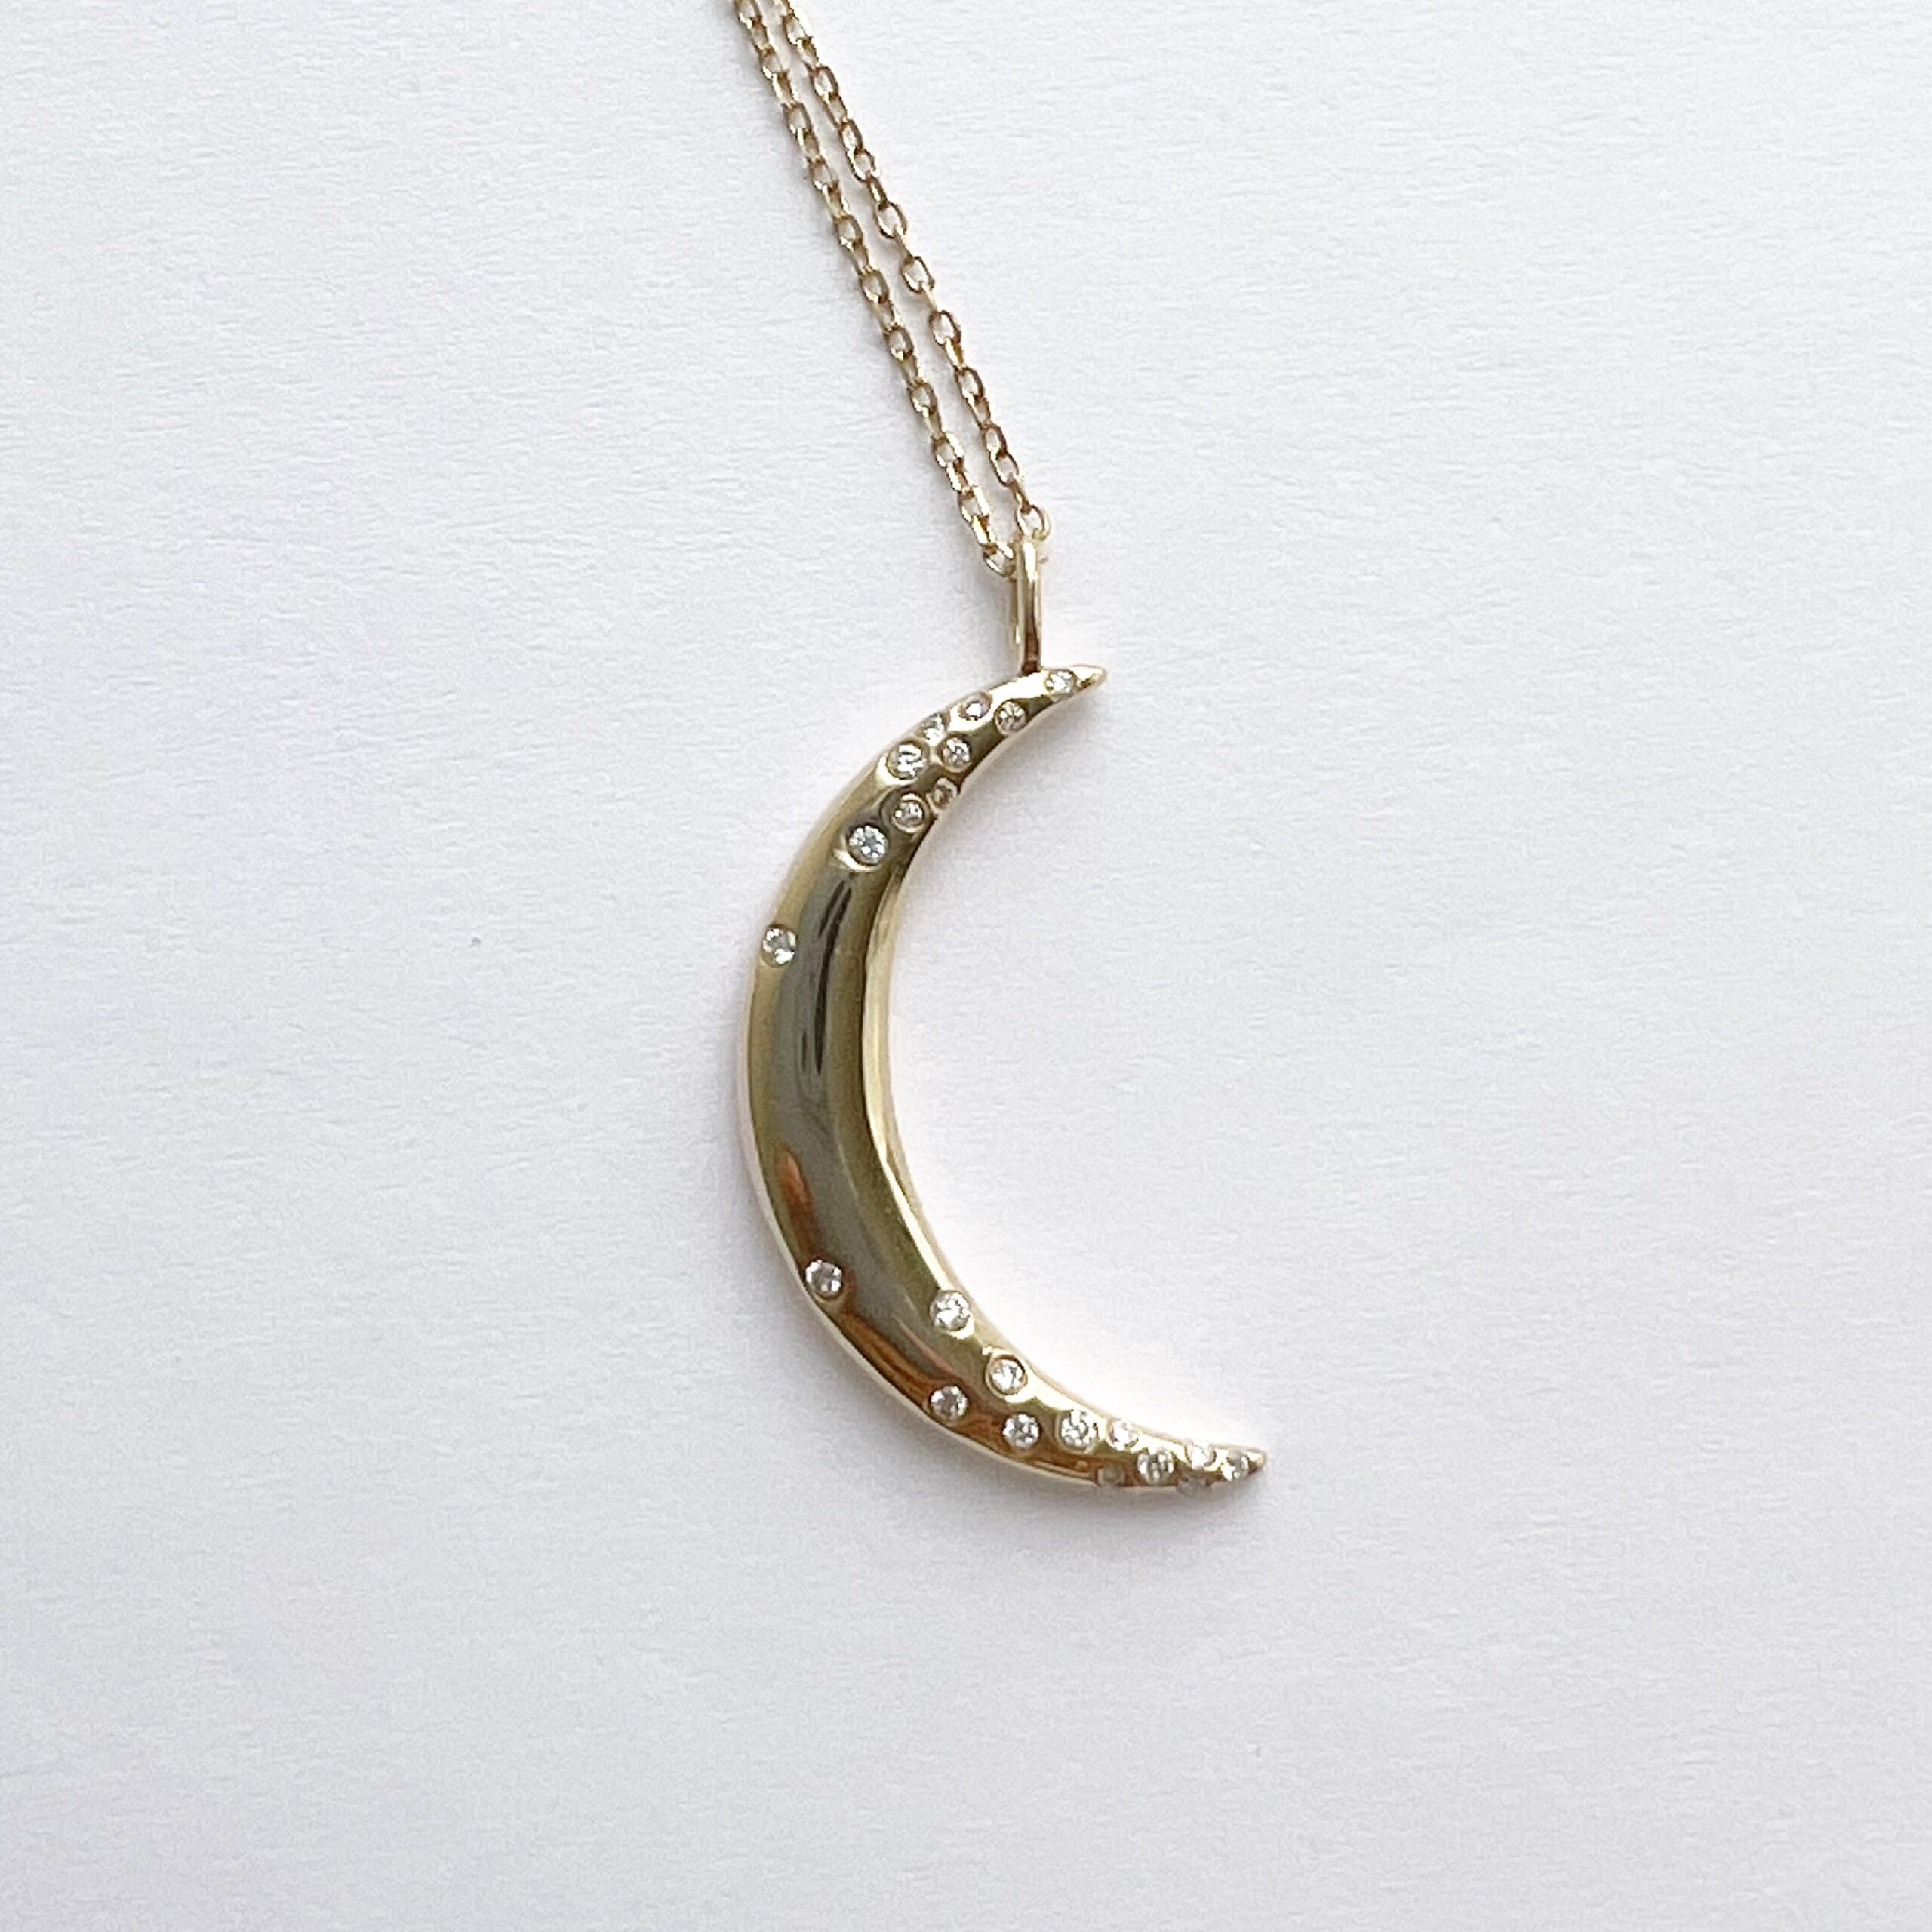 Penny Preville 18K Gold Galaxy Crescent Moon Necklace